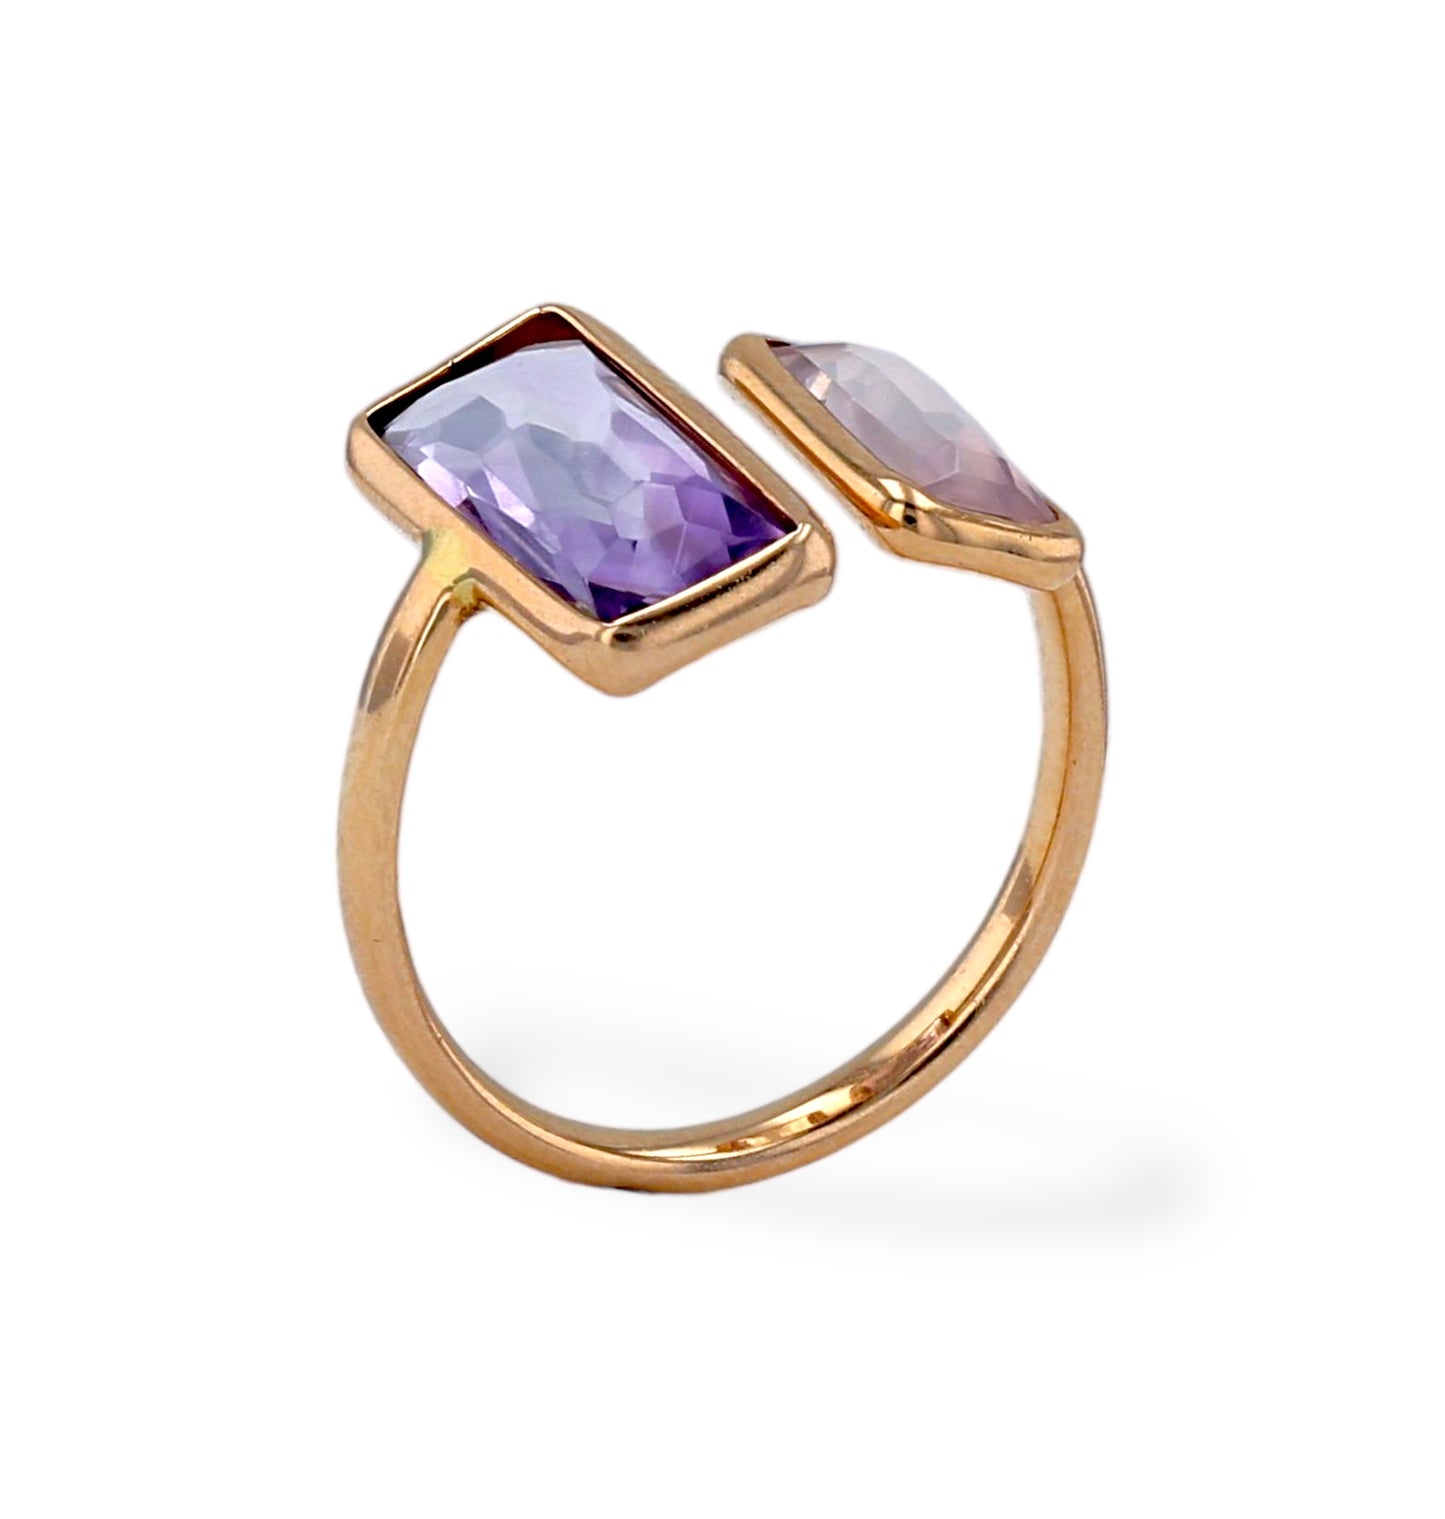 Rose gold 14k solid square lady ring